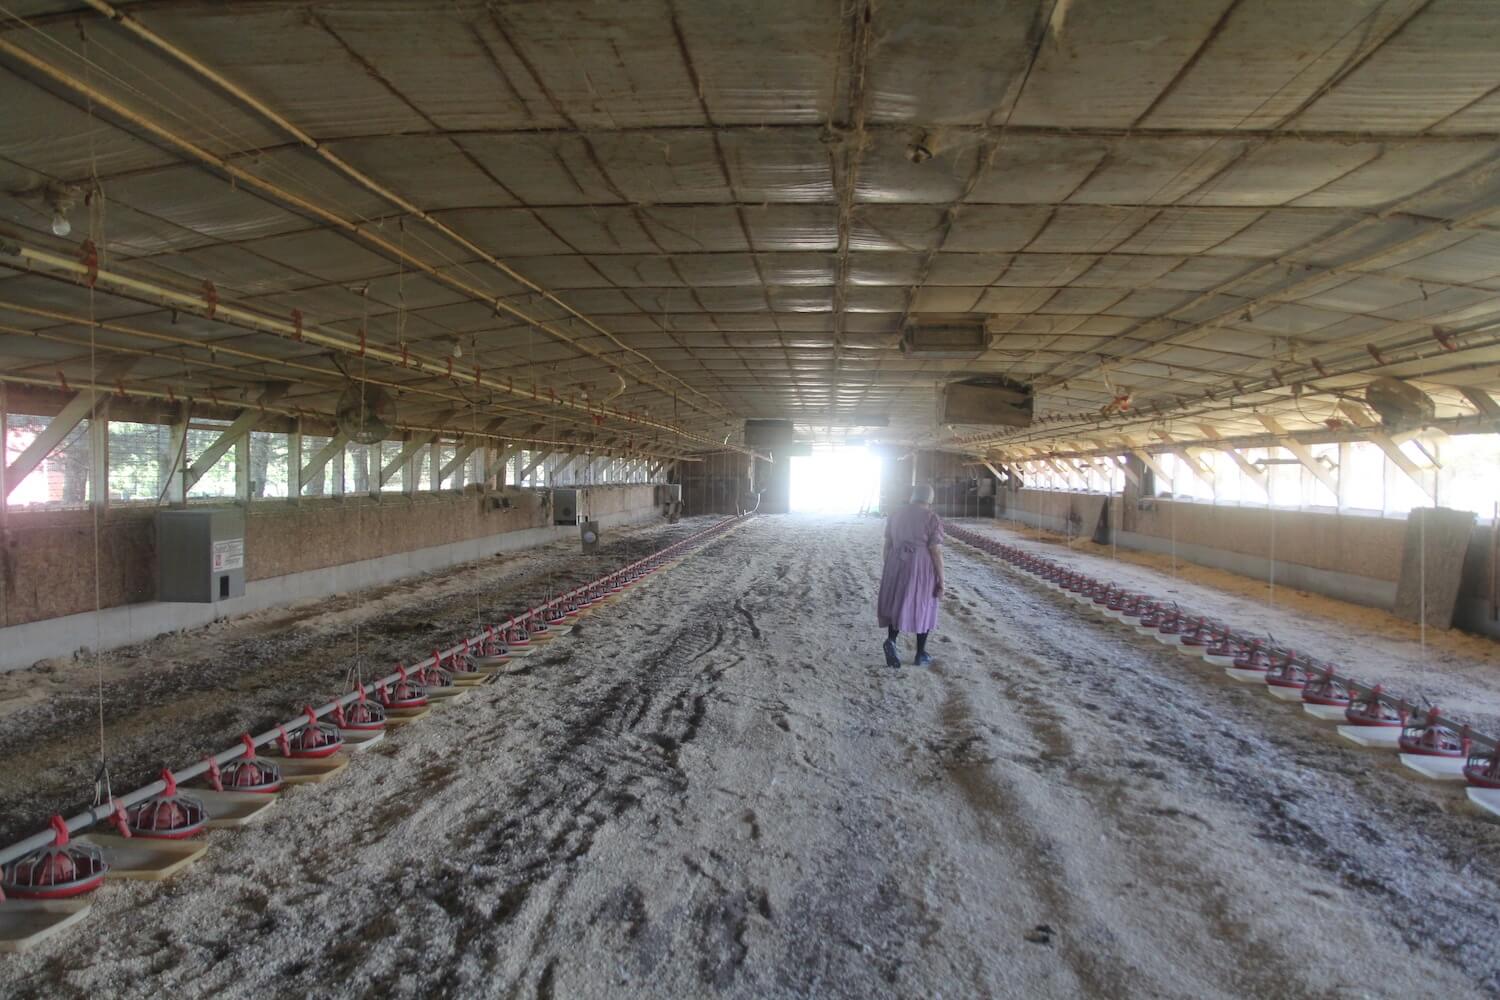 Virginia Burkholder inside her chicken house, which she built in the 1980s. She started raising organic chicken for Shenandoah Valley Organic in 2015, after the large company she contracted with started pressuring her to make costly upgrades. (March 2020)